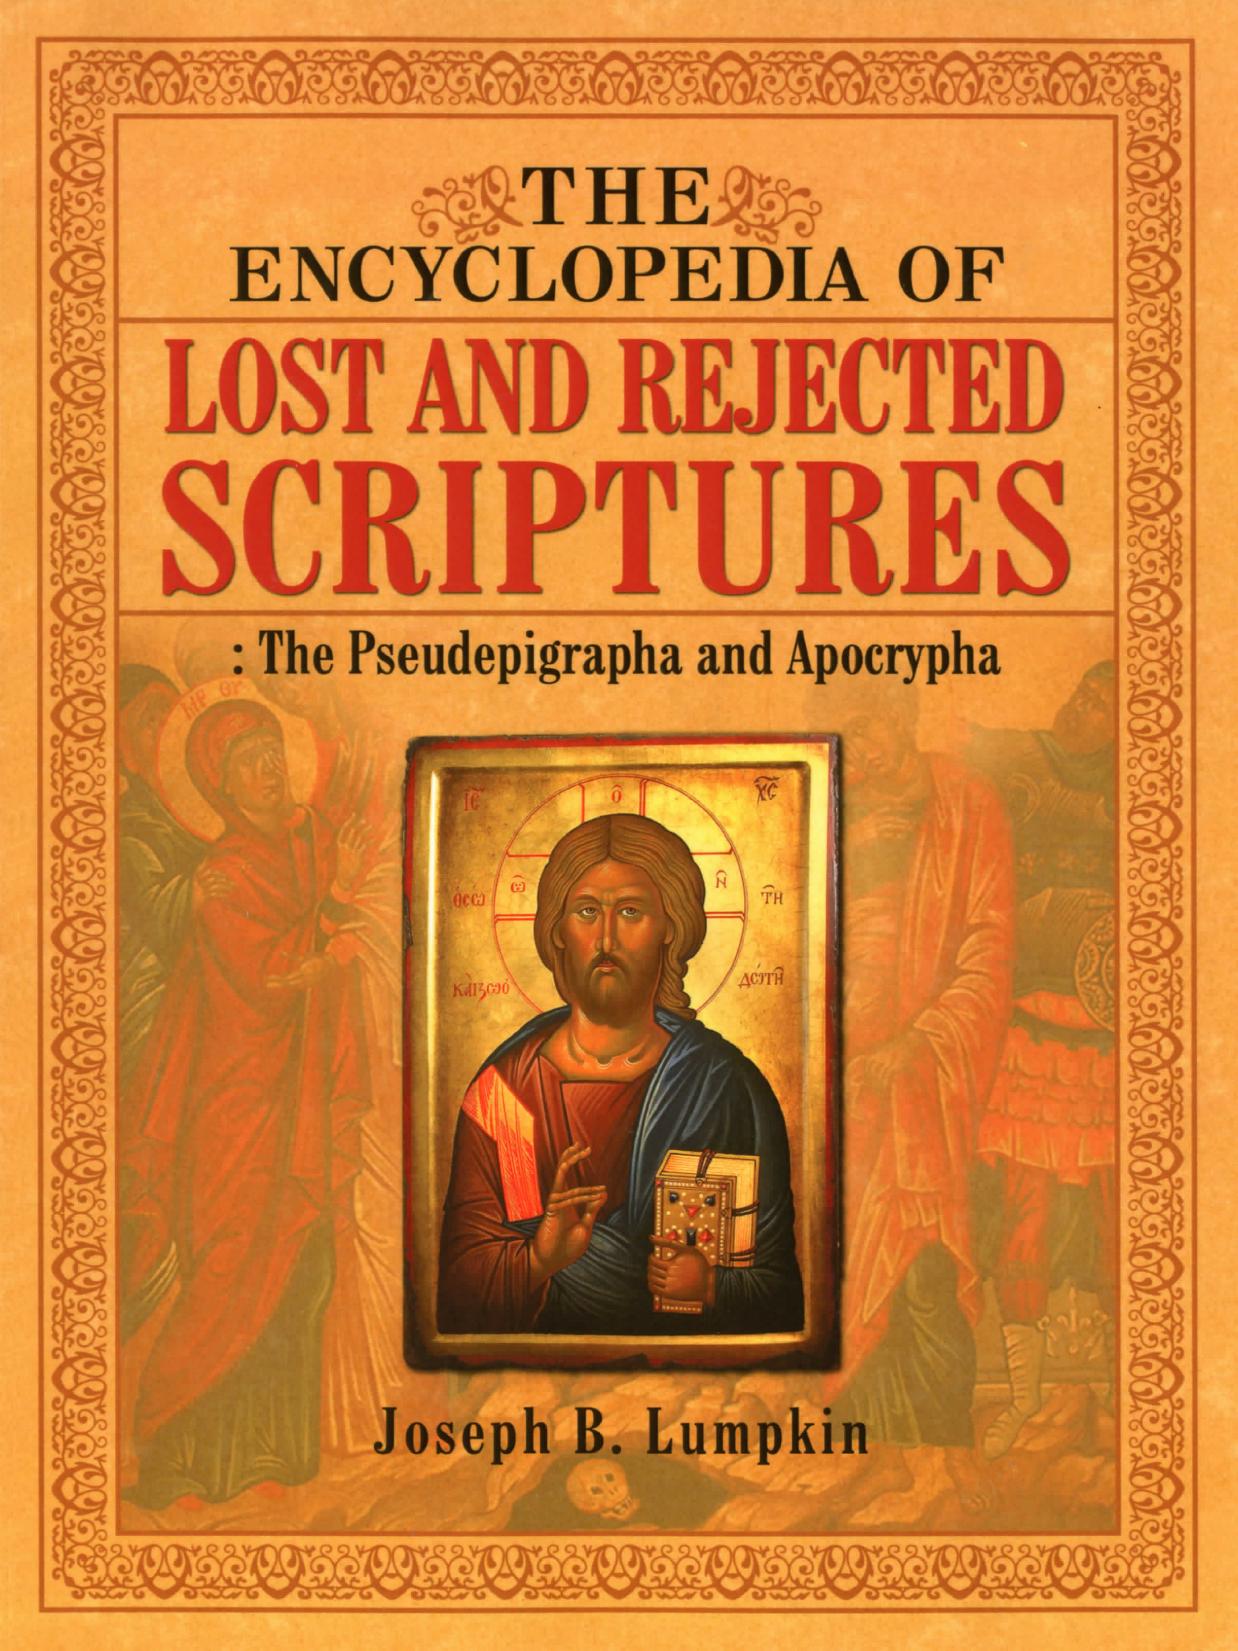 The Encyclopedia of Lost and Rejected Scriptures: The Pseudepigrapha and Apocrypha